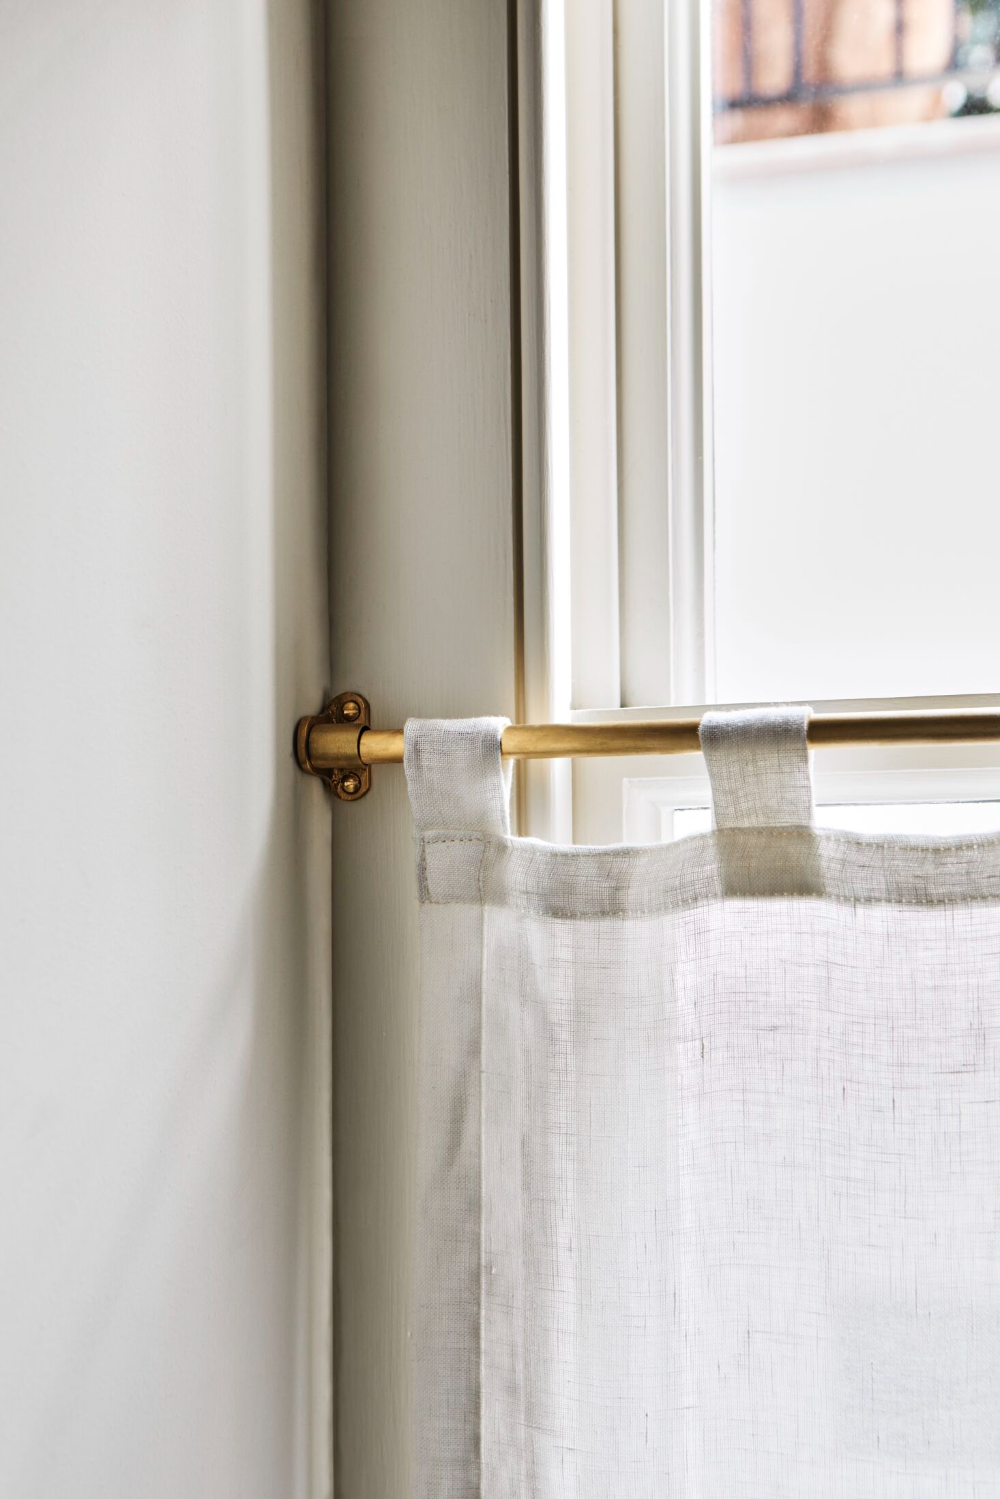 Curtain Rods: Choosing the Right Hardware for Your Windows